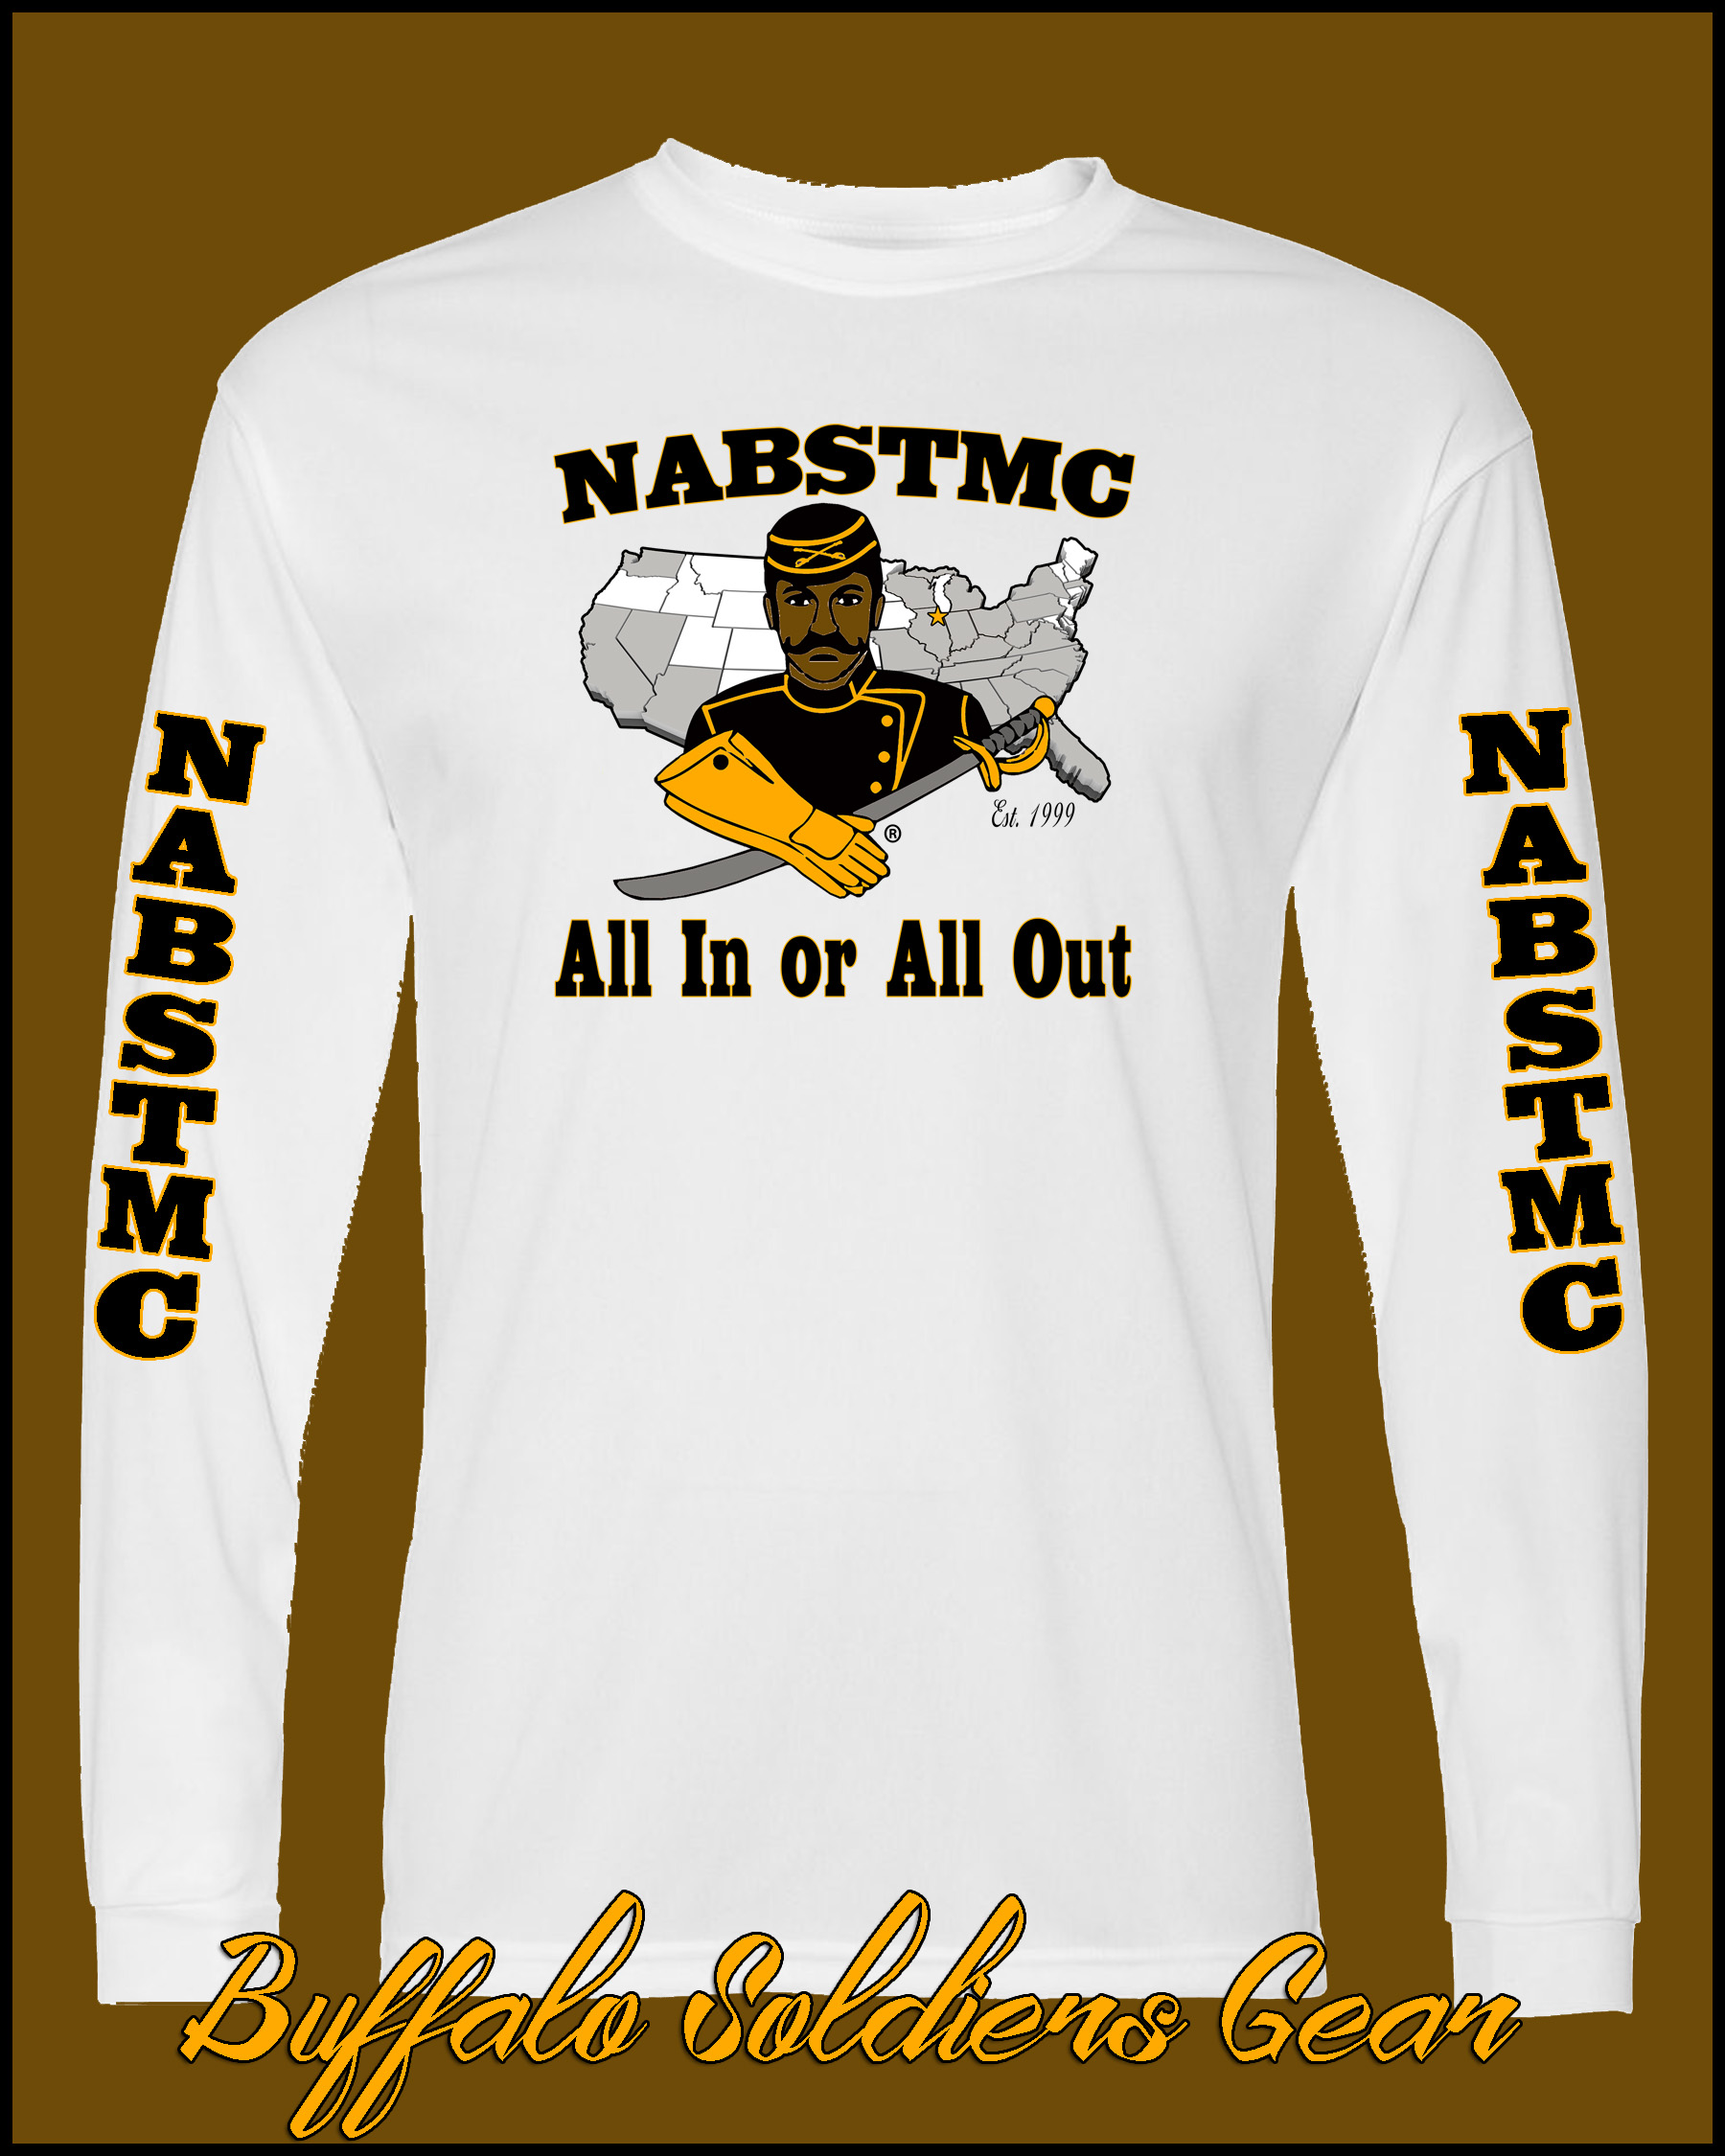 Buffalo Soldiers Gear All In or All Out